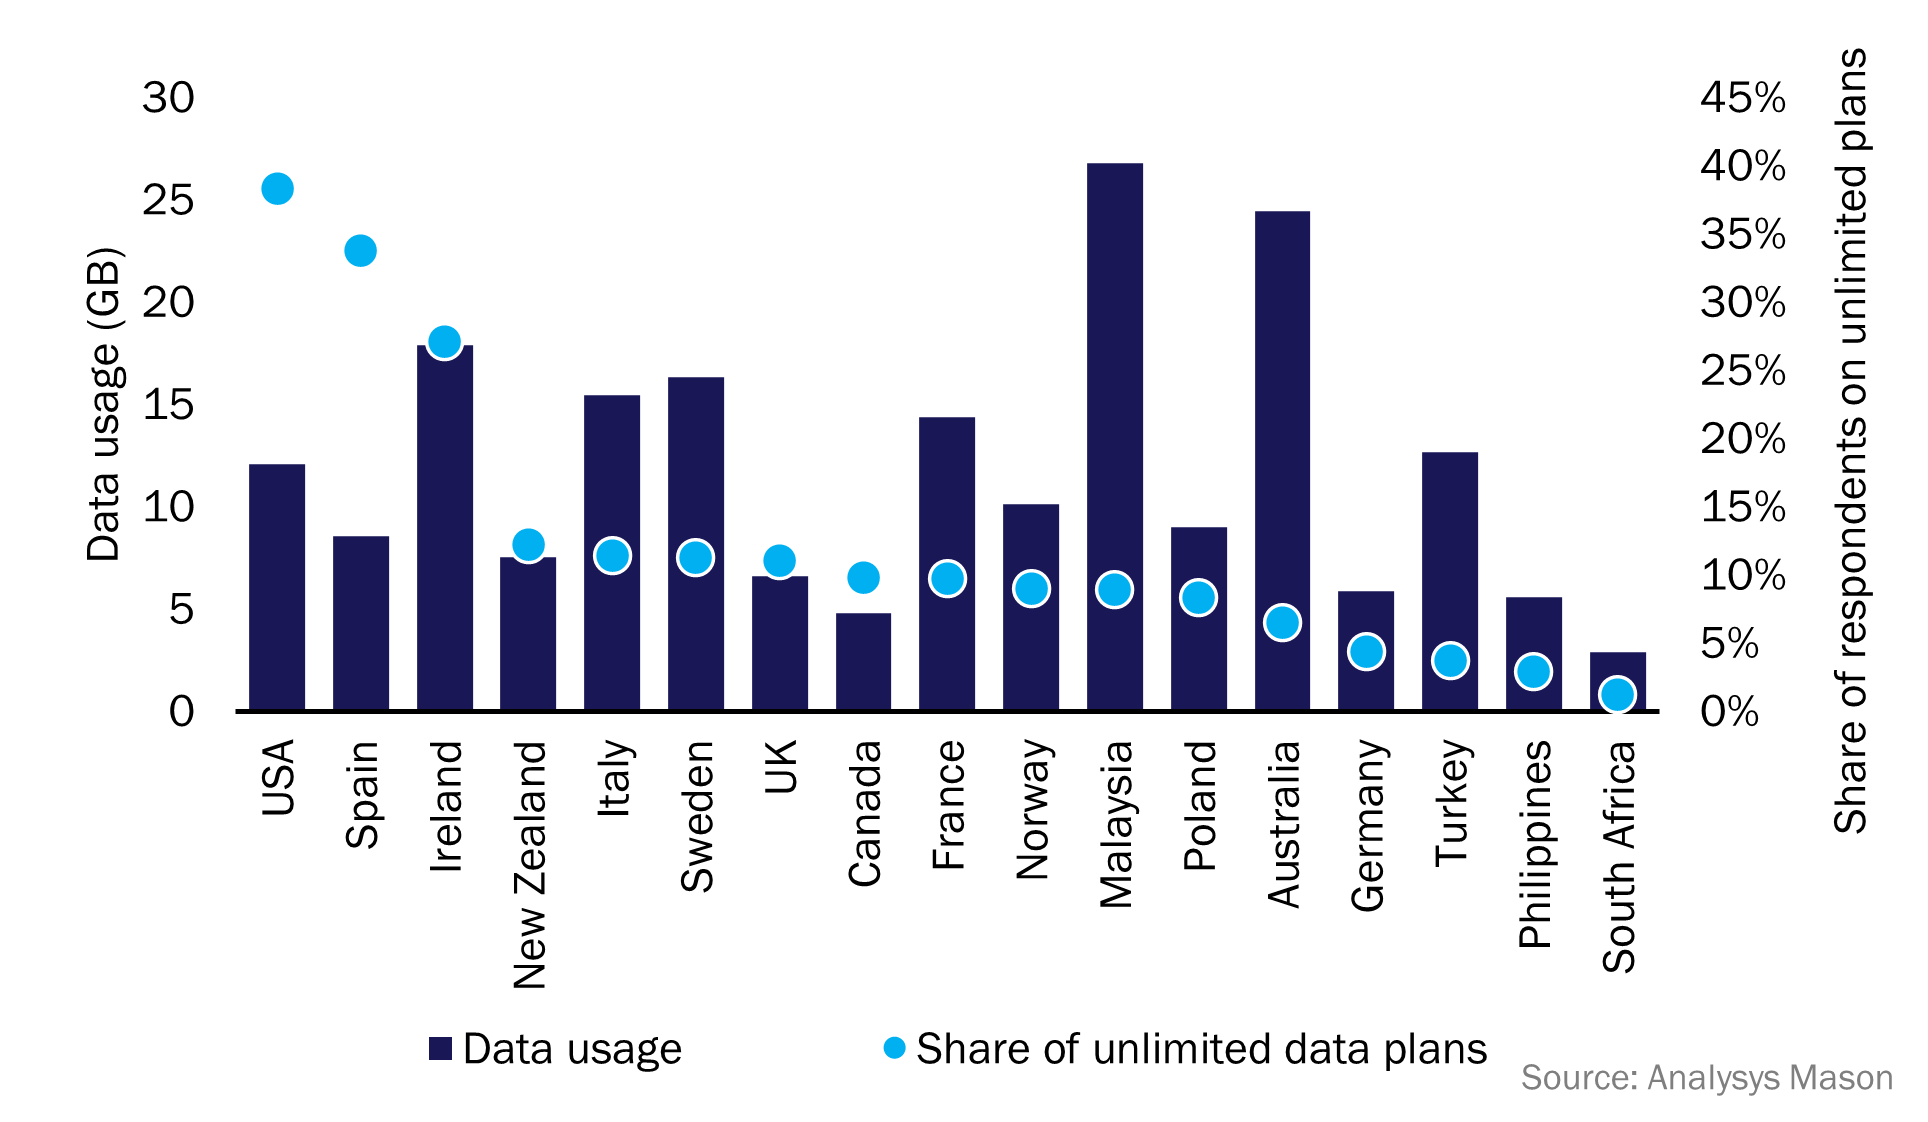 Figure 1: Average monthly data usage per connection and share of respondents on unlimited data plans, by country, worldwide, 2022